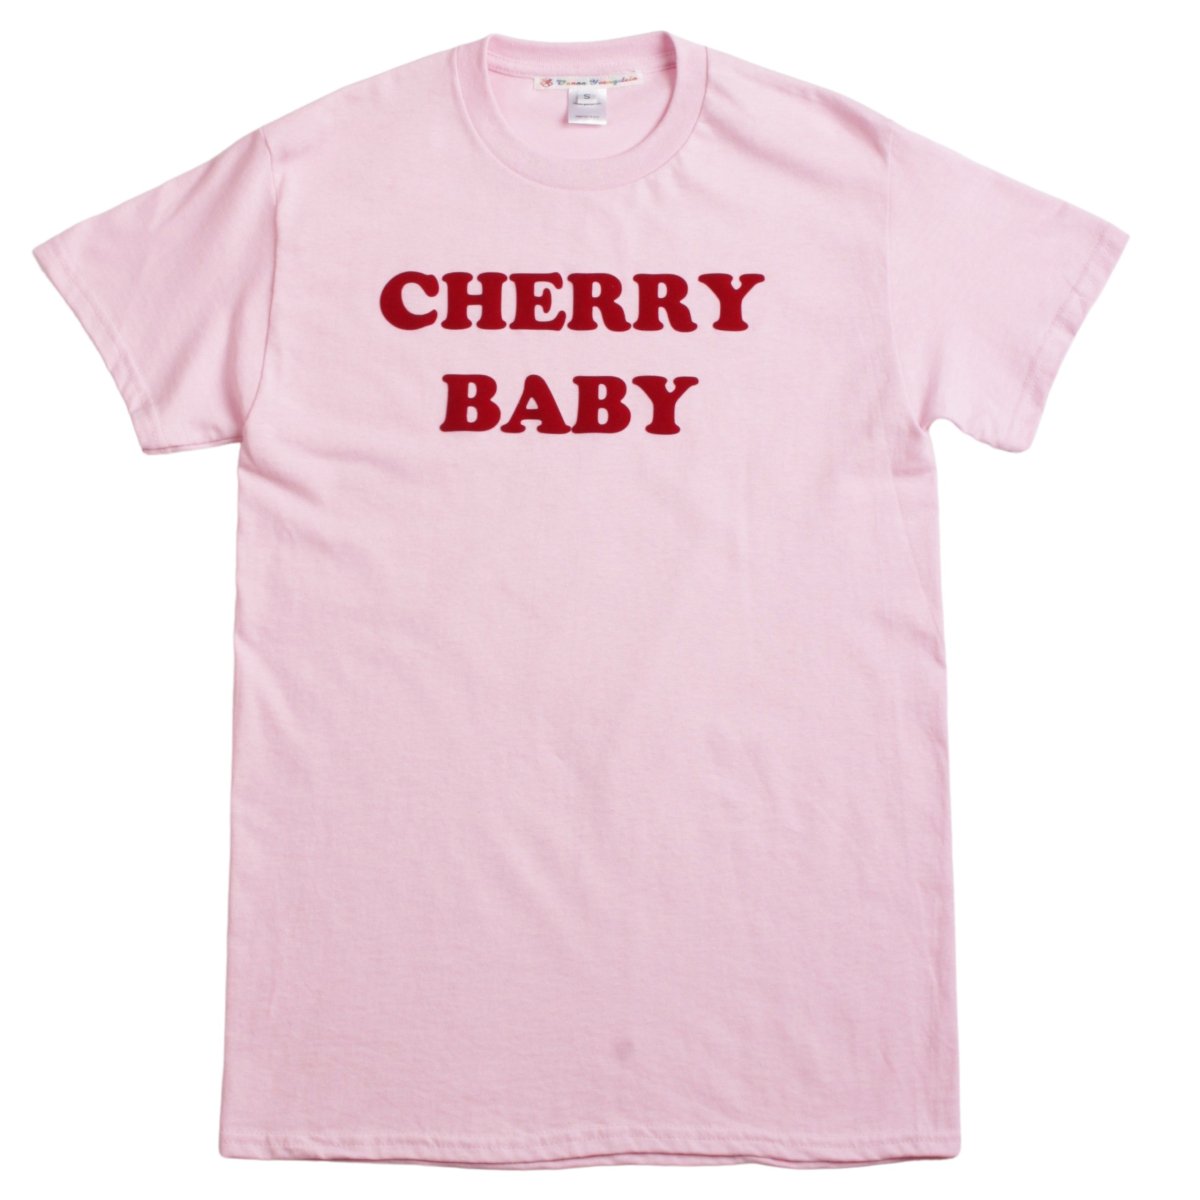 Cherry Baby Tee【Pink/Red】